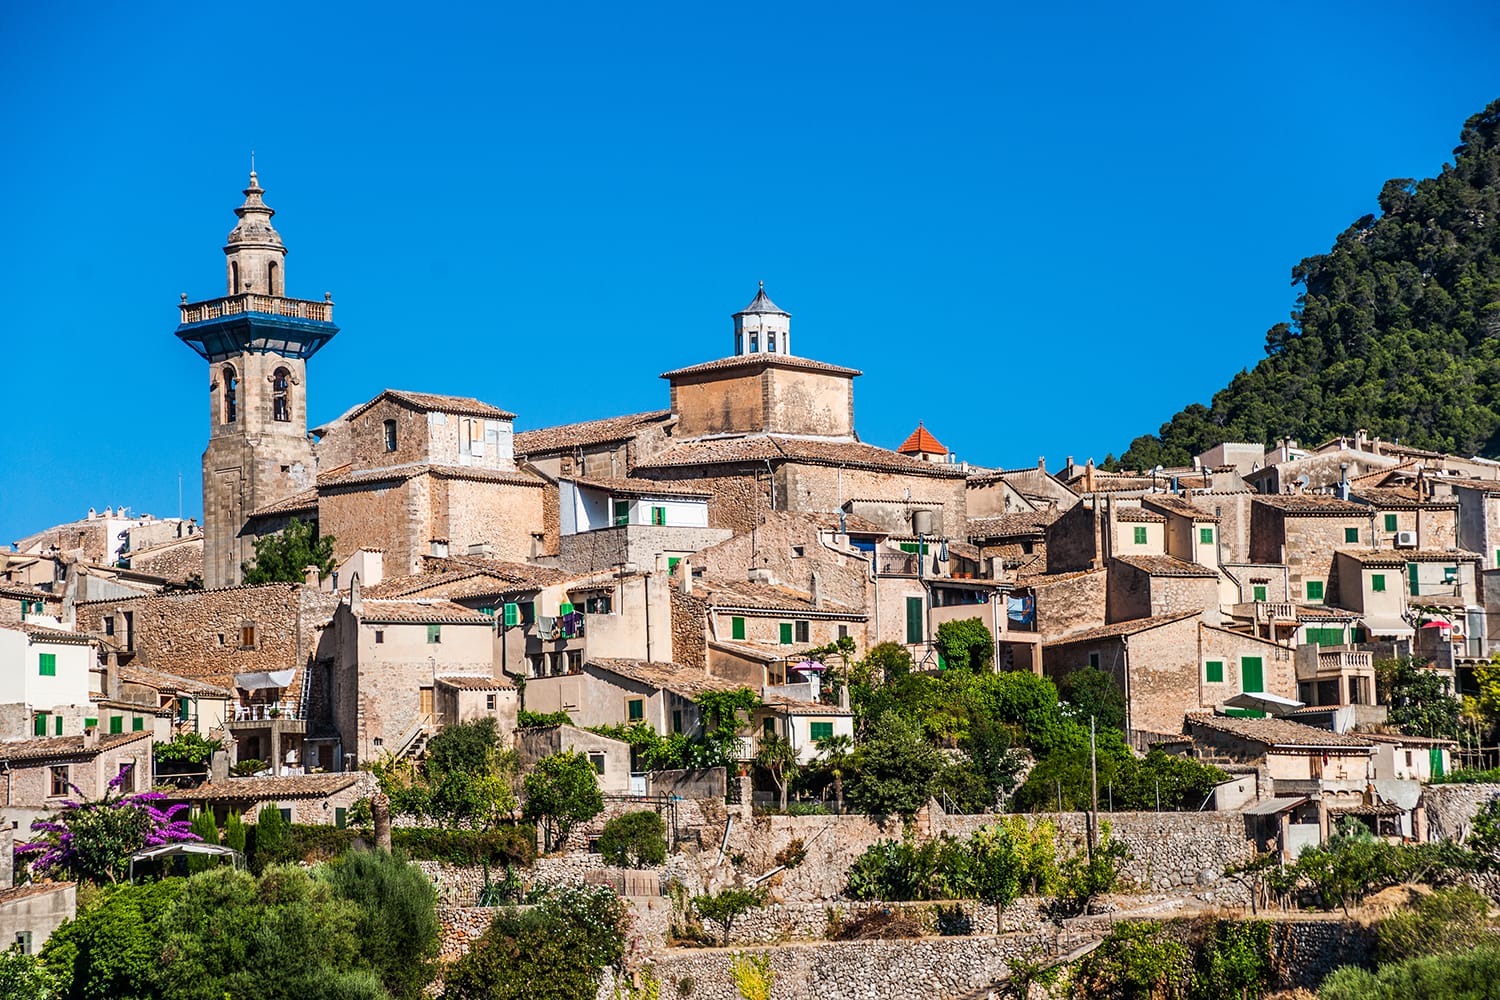 Beautiful view of the small town Valldemossa situated in picturesque mountains on Mallorca island, Spain.